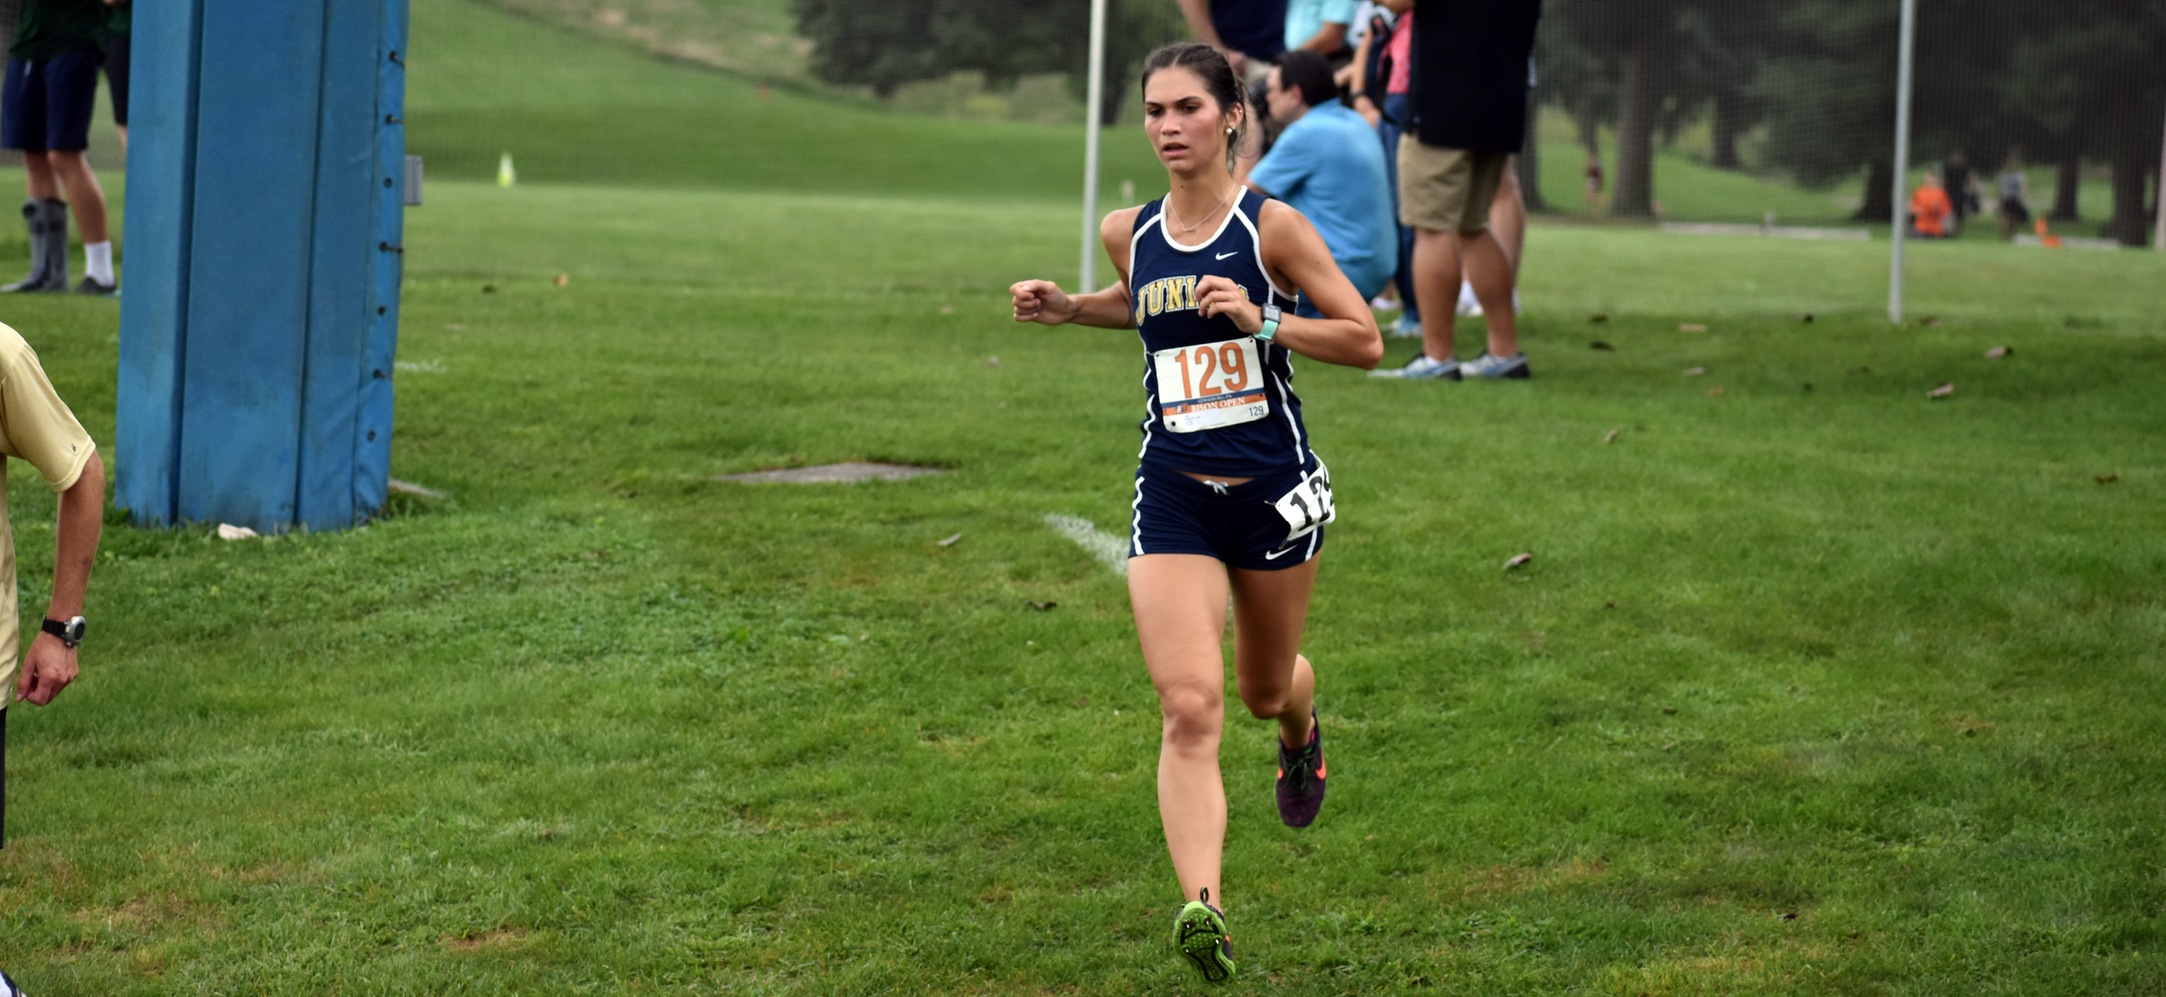 Women's cross country member, Julia Freimuth finished 129th and set a new PR. 